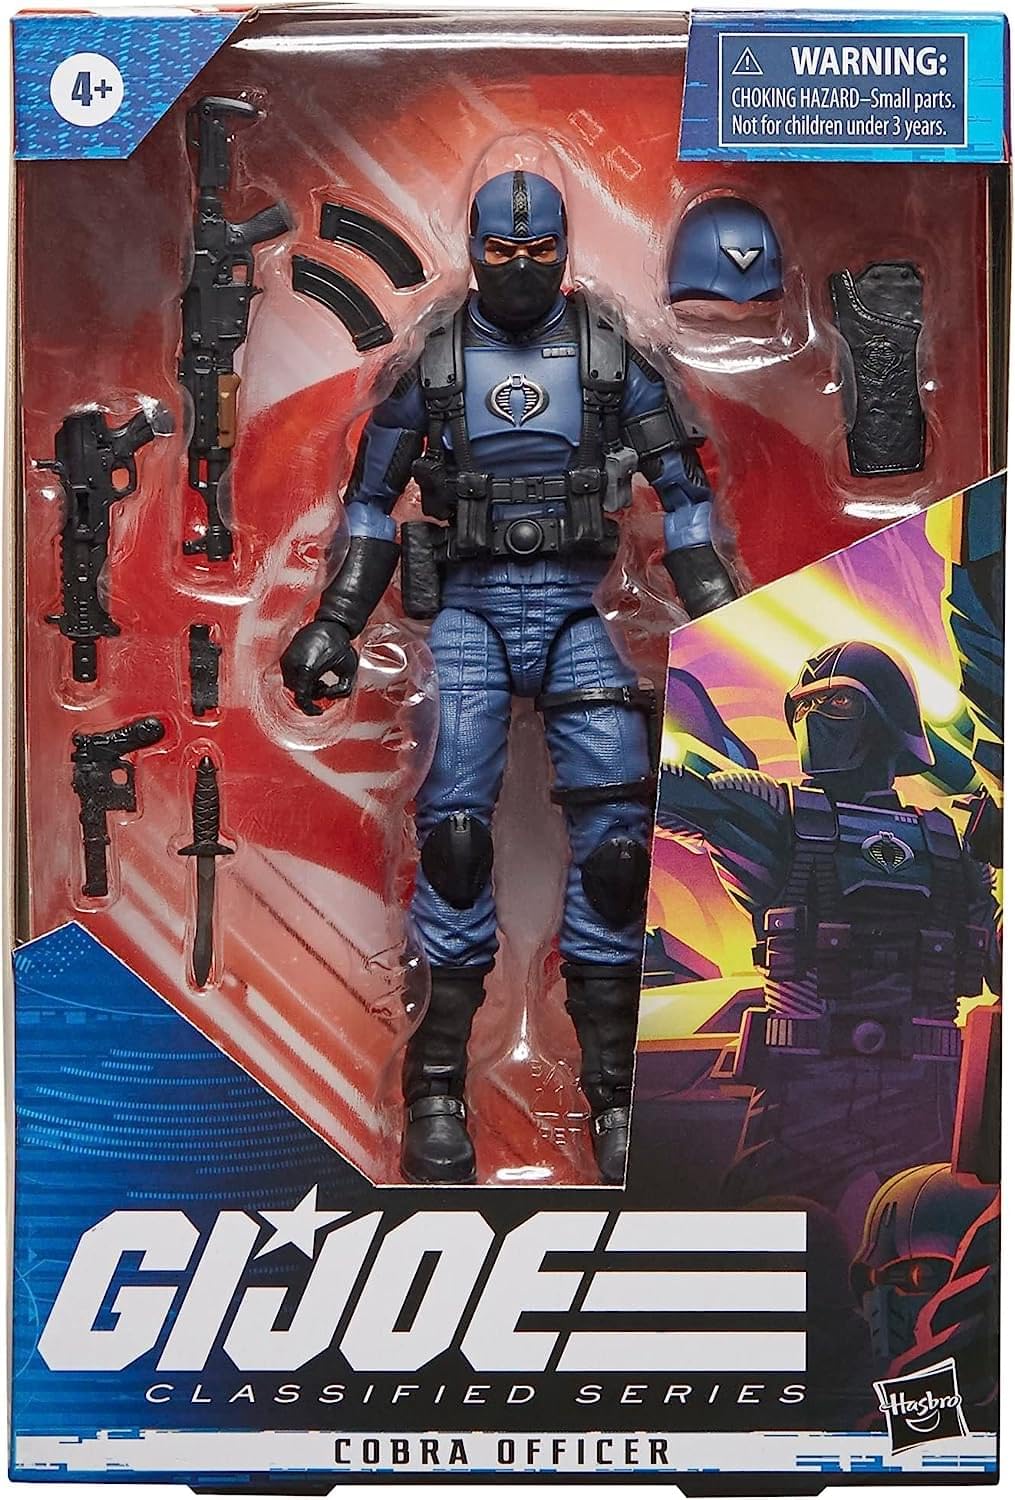 G.I. Joe Classified Series Cobra Officer Action Figure 37 Collectible Premium Toy with Multiple Accessories 6-Inch-Scale, Custom Package Art